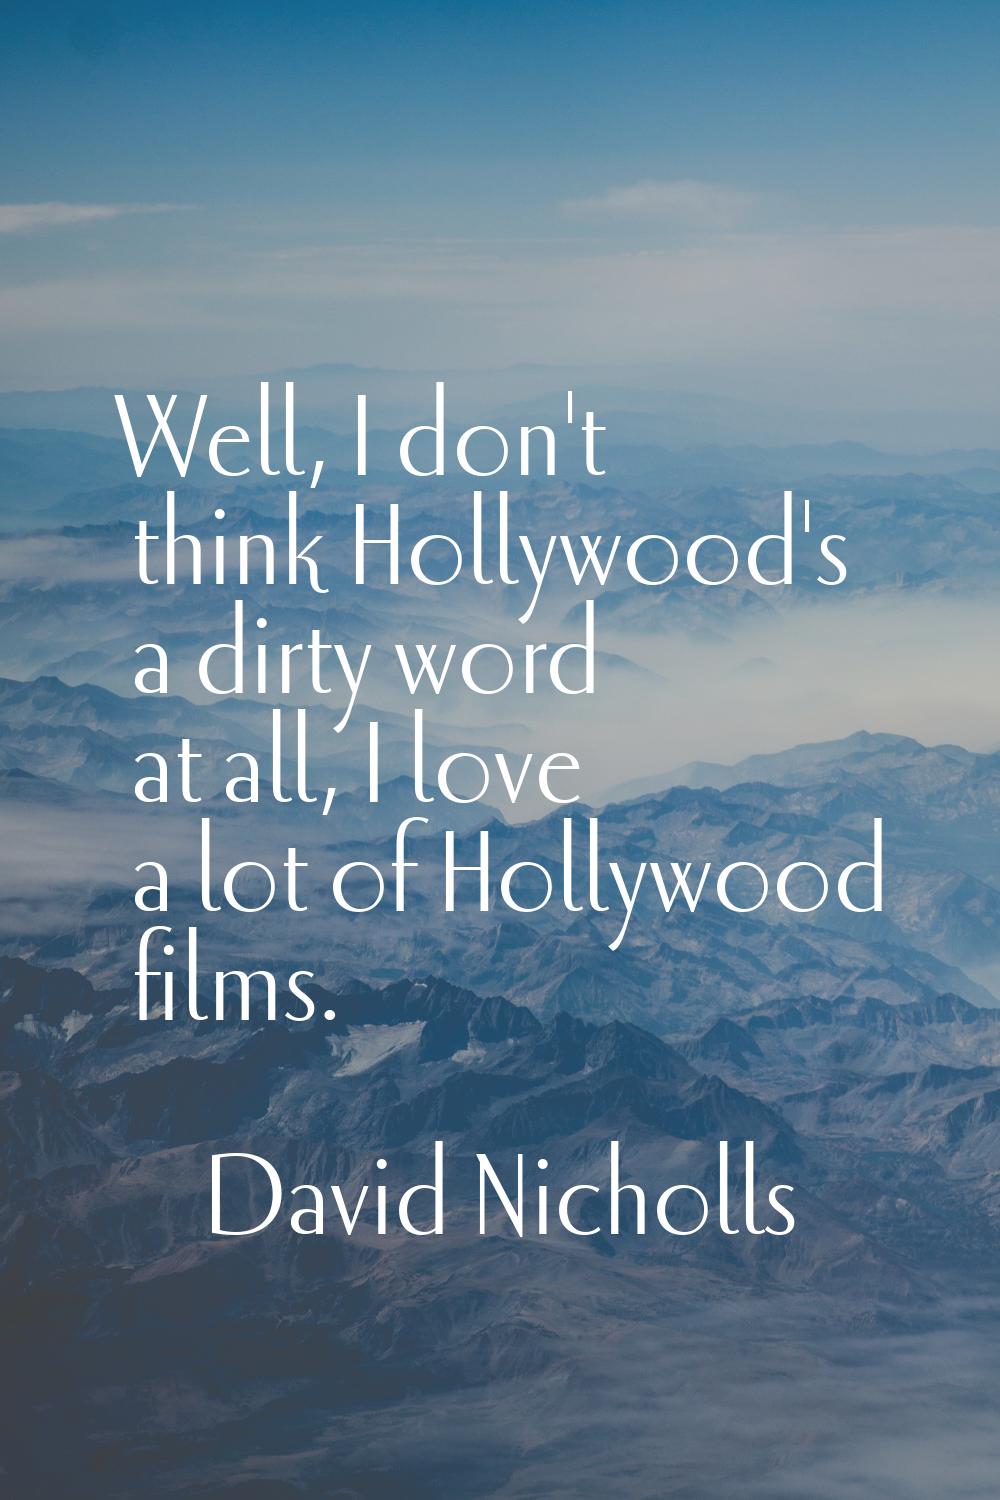 Well, I don't think Hollywood's a dirty word at all, I love a lot of Hollywood films.